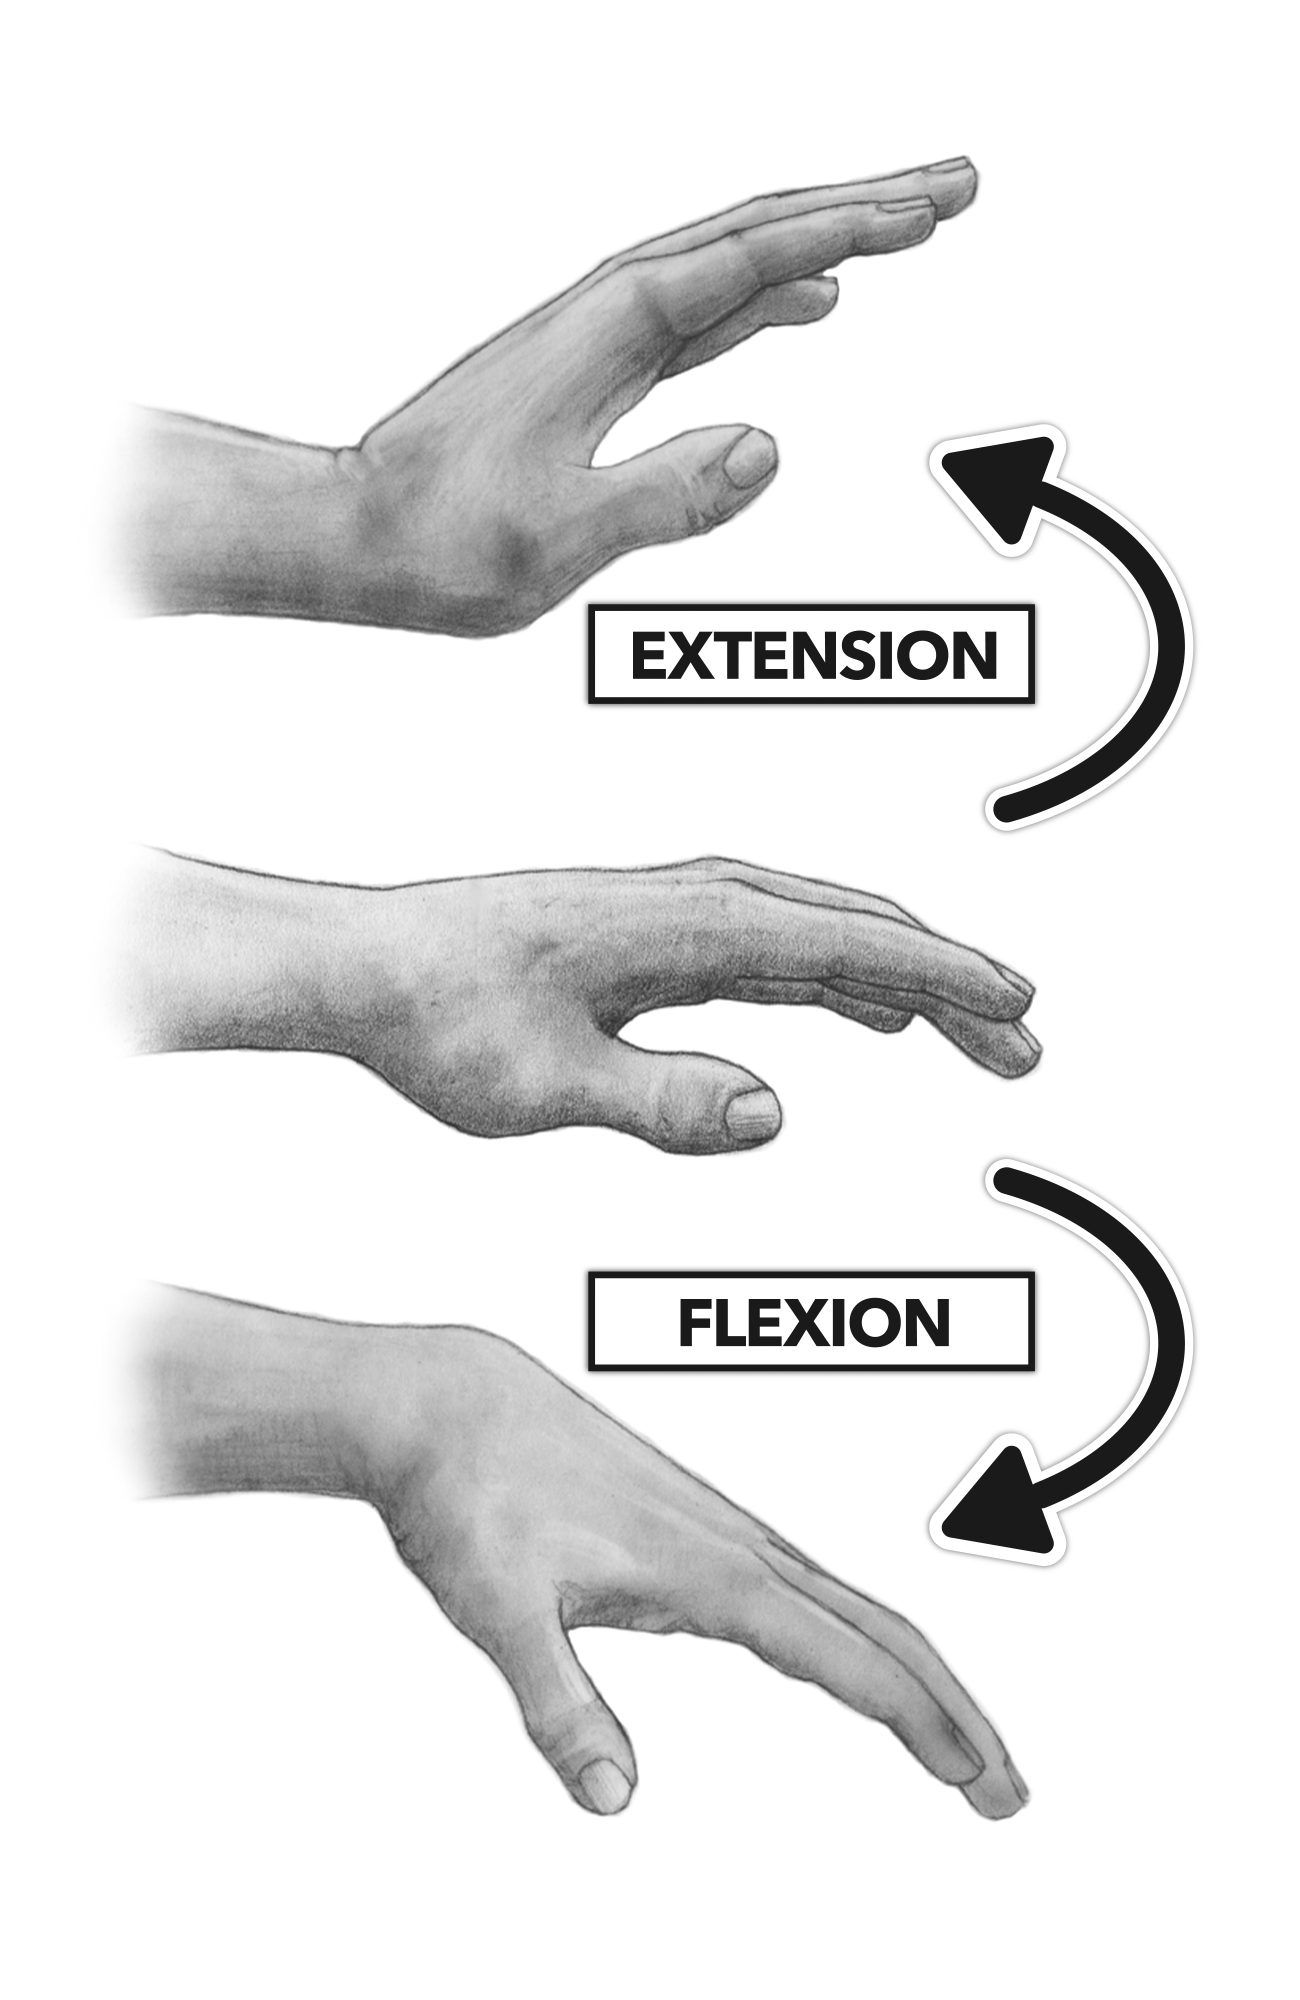 Wrist Flexion And Extension